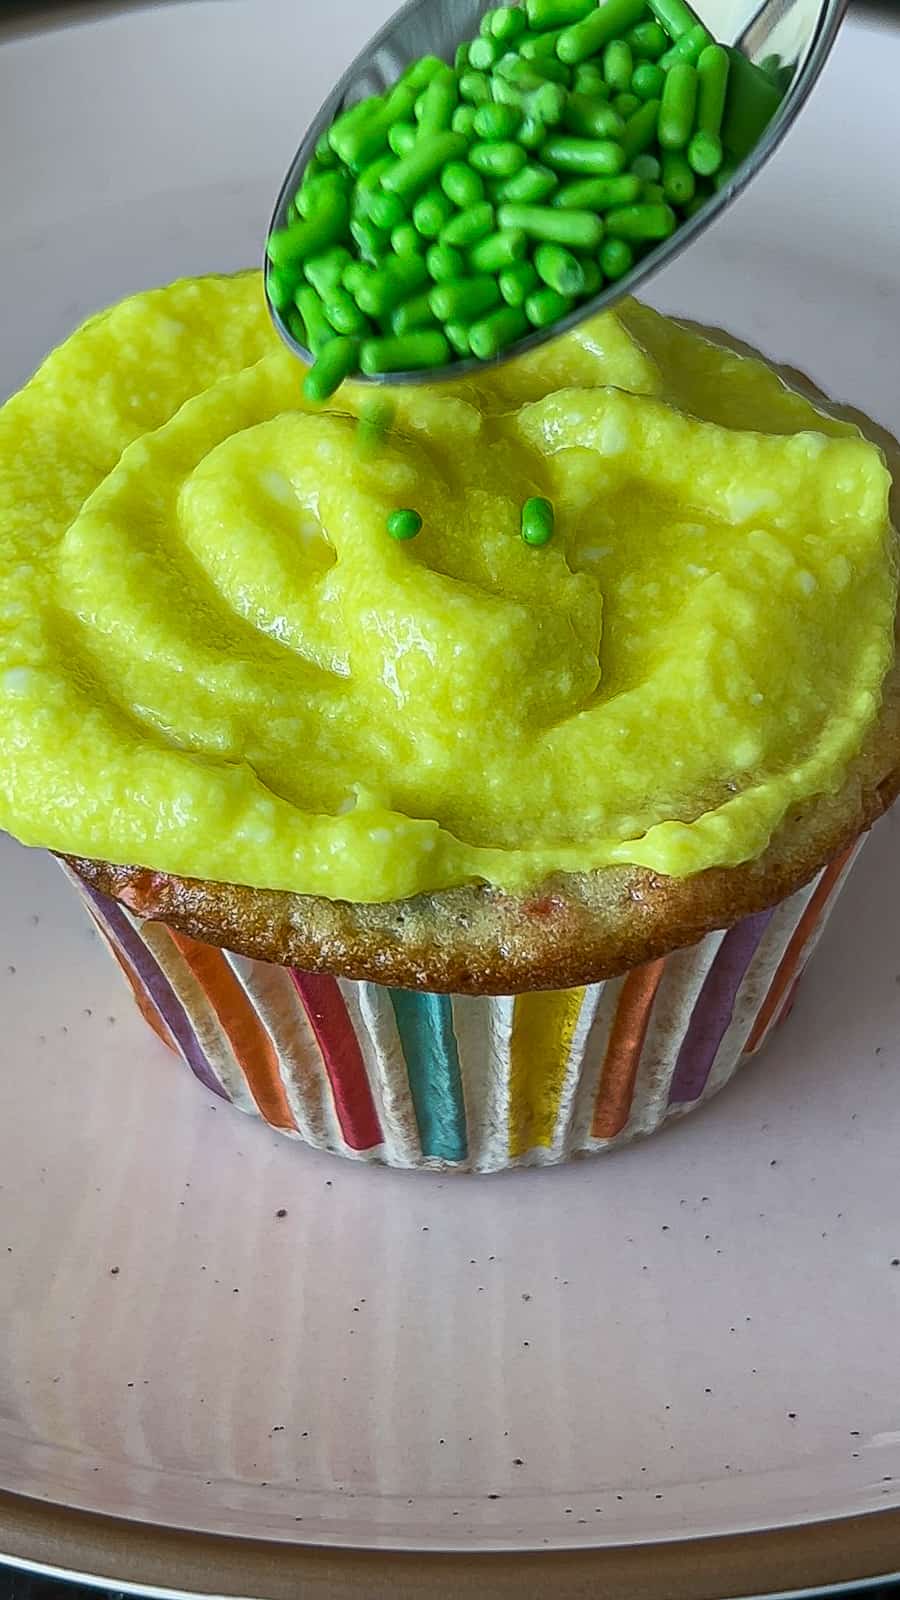 Adding grass sprinkles to Funfetti Easter Cupcakes with yellow frosting